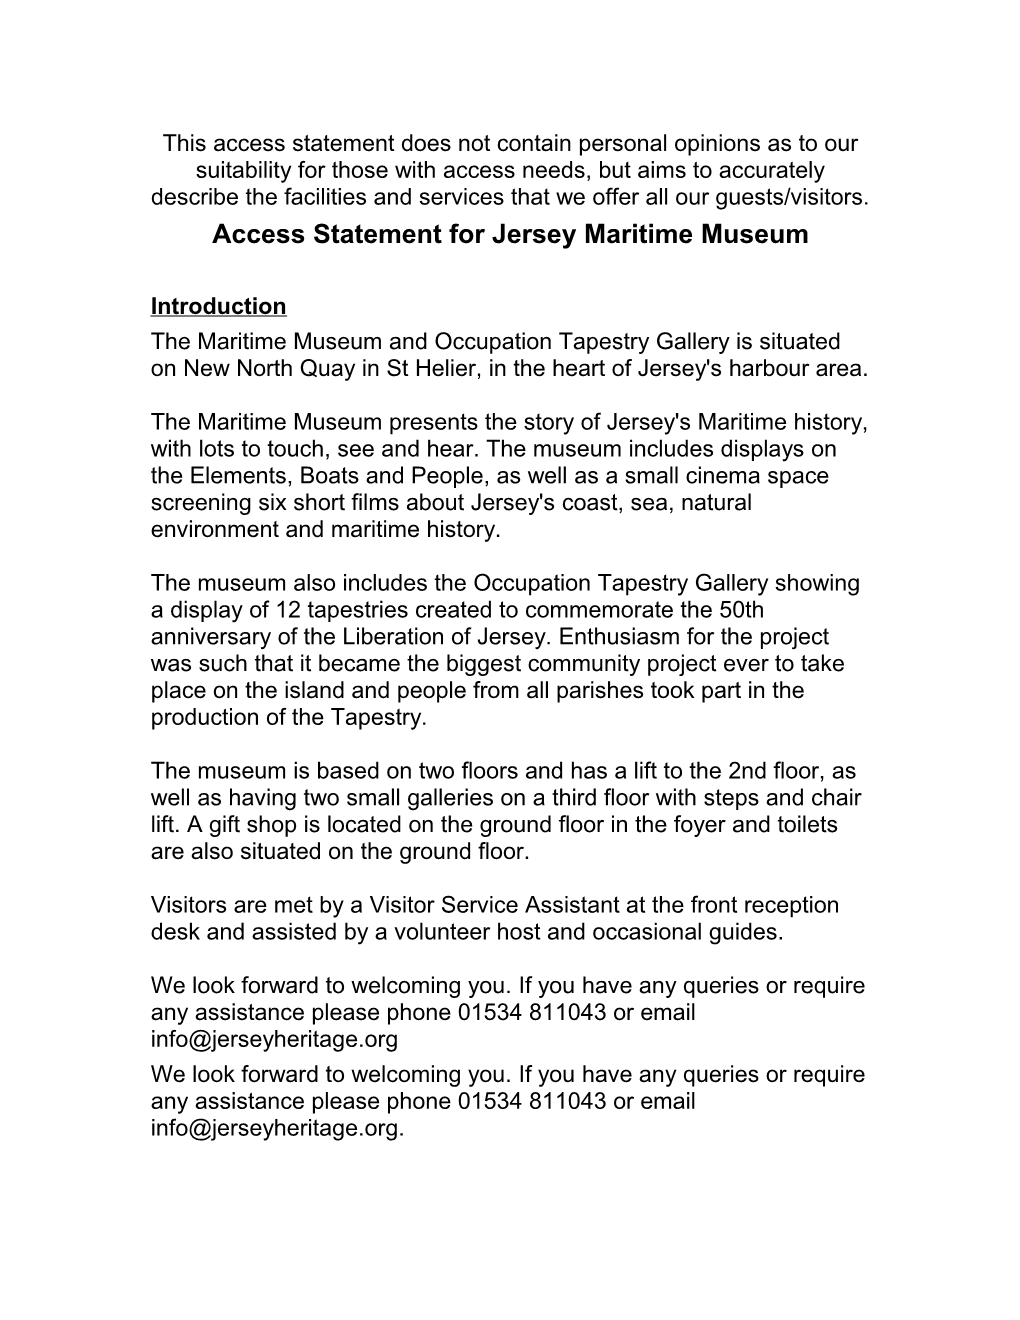 Access Statement for Jersey Maritime Museum